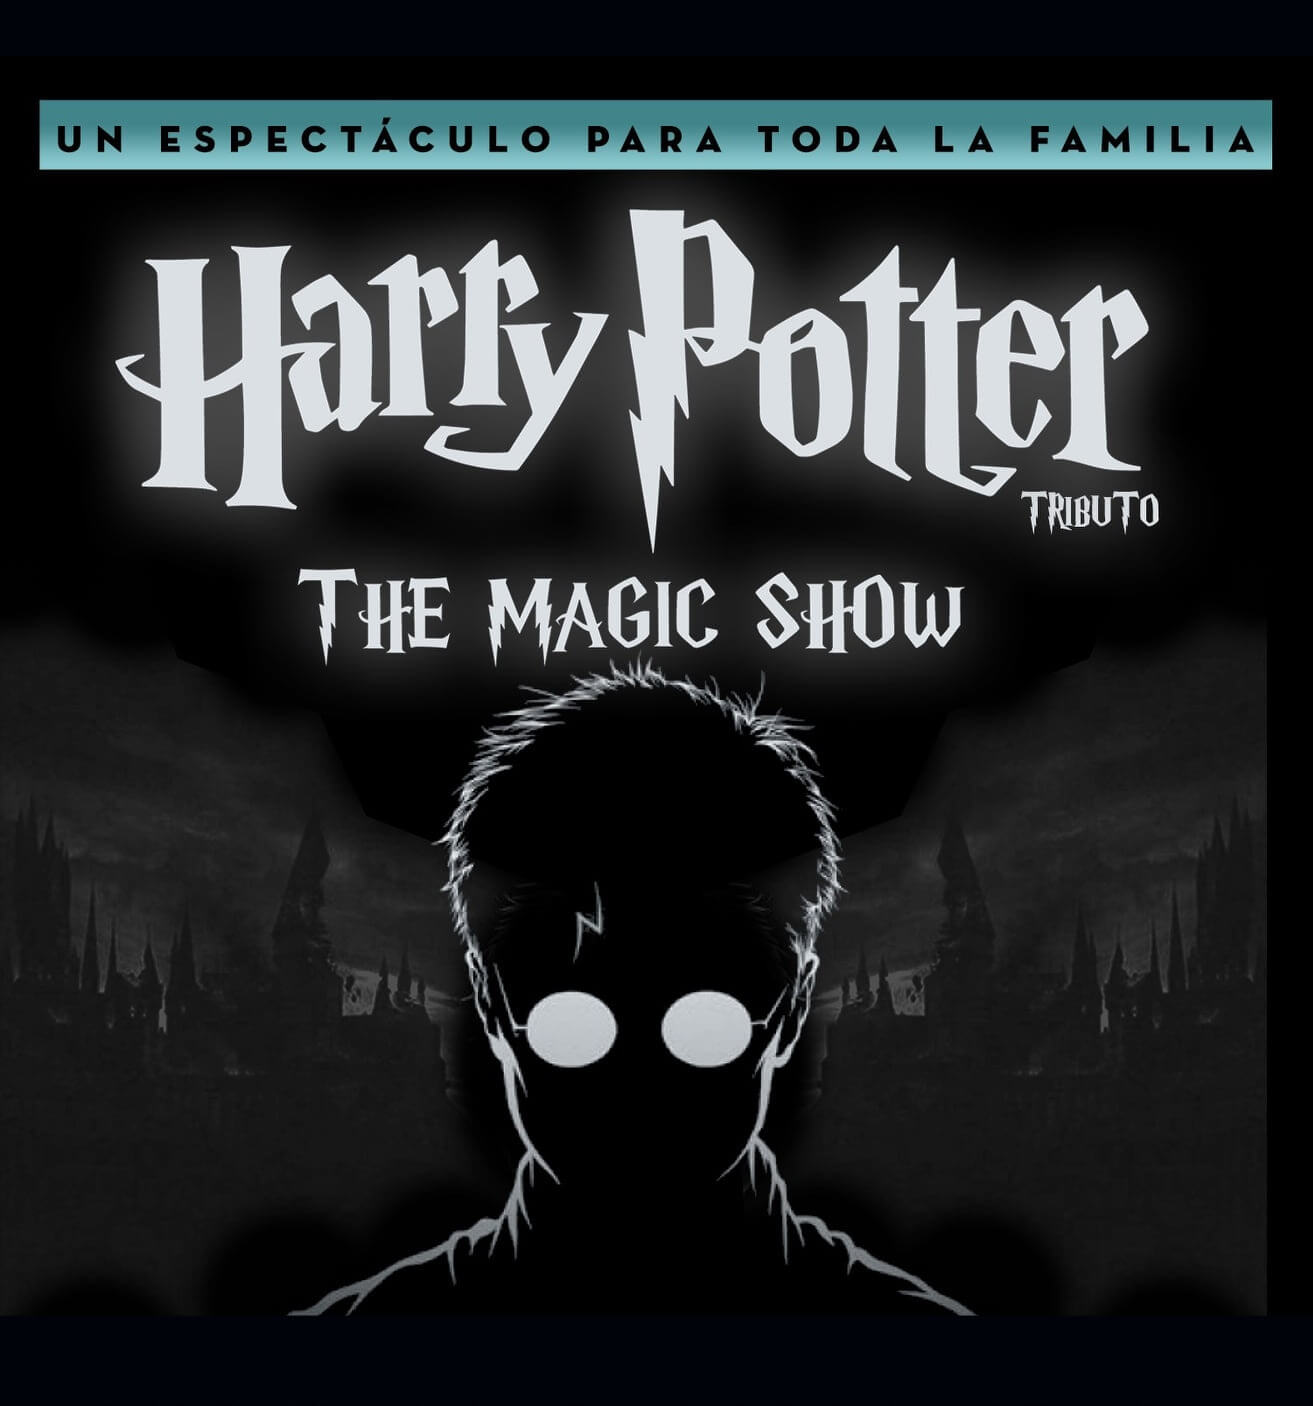 hary potter the magic show